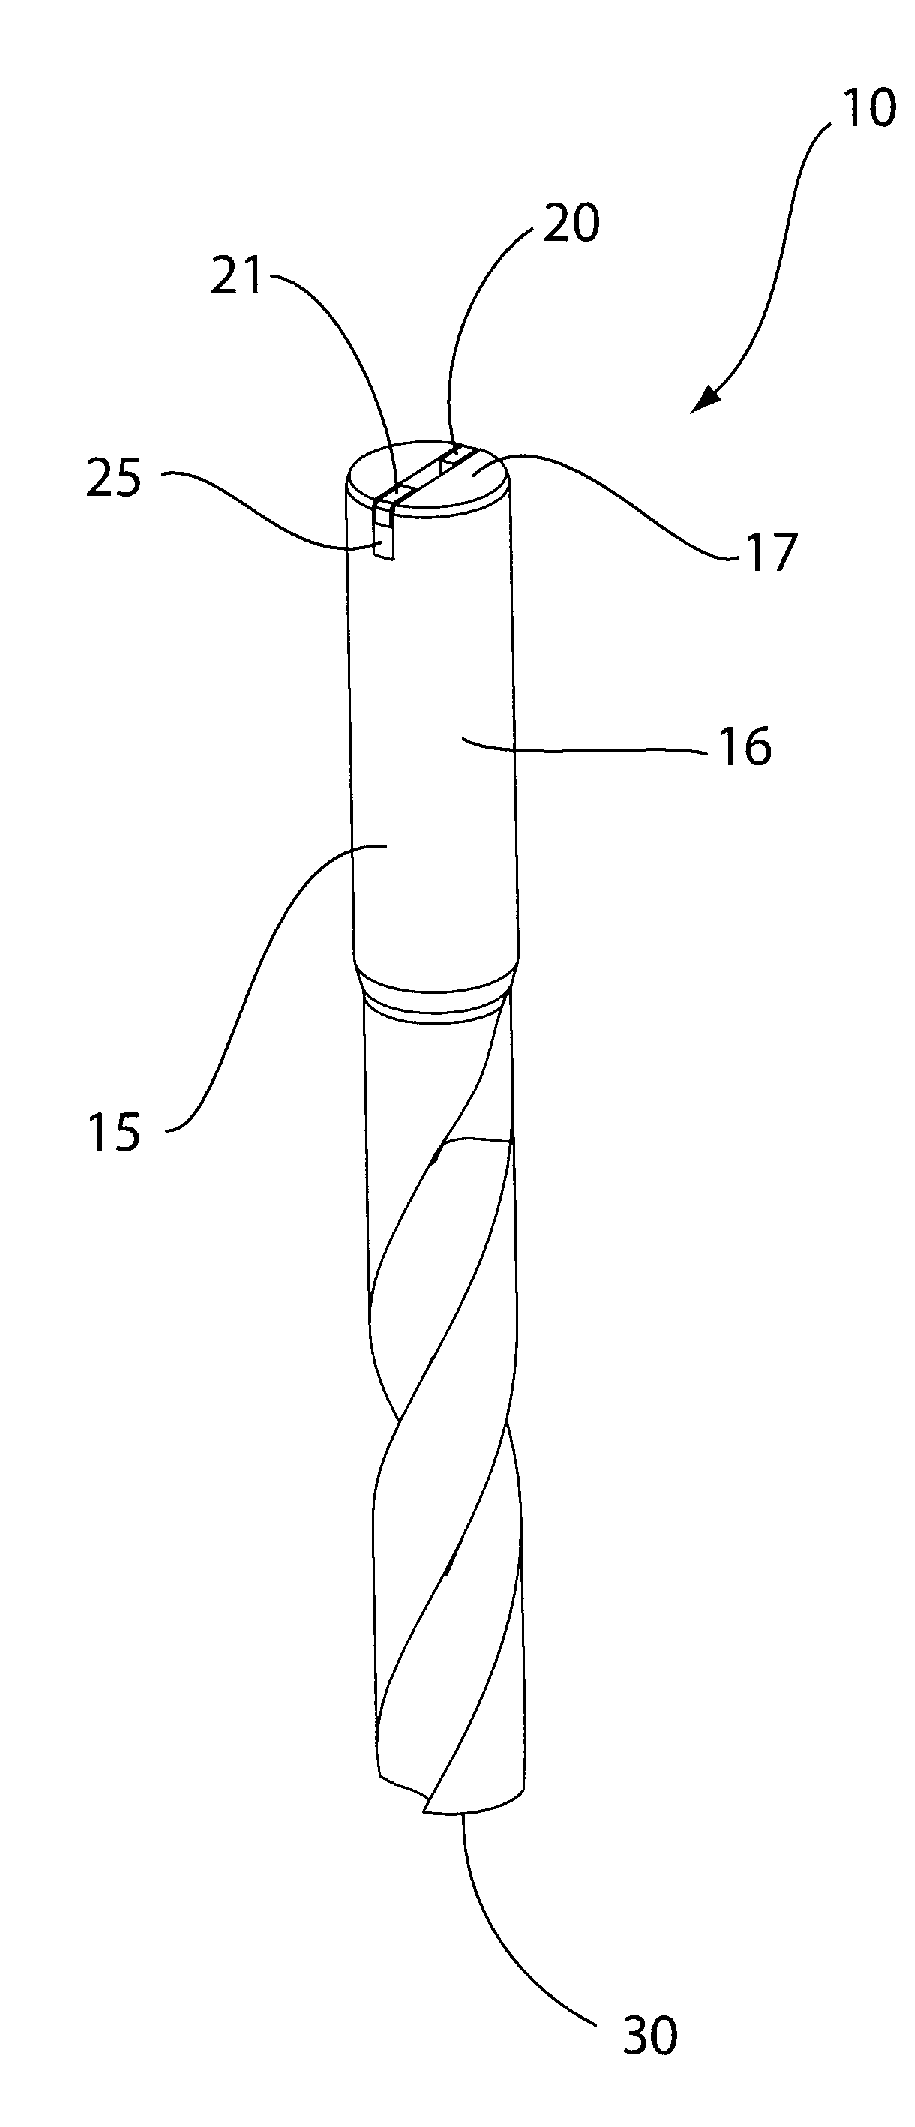 Cutting tool with integrated circuit chip